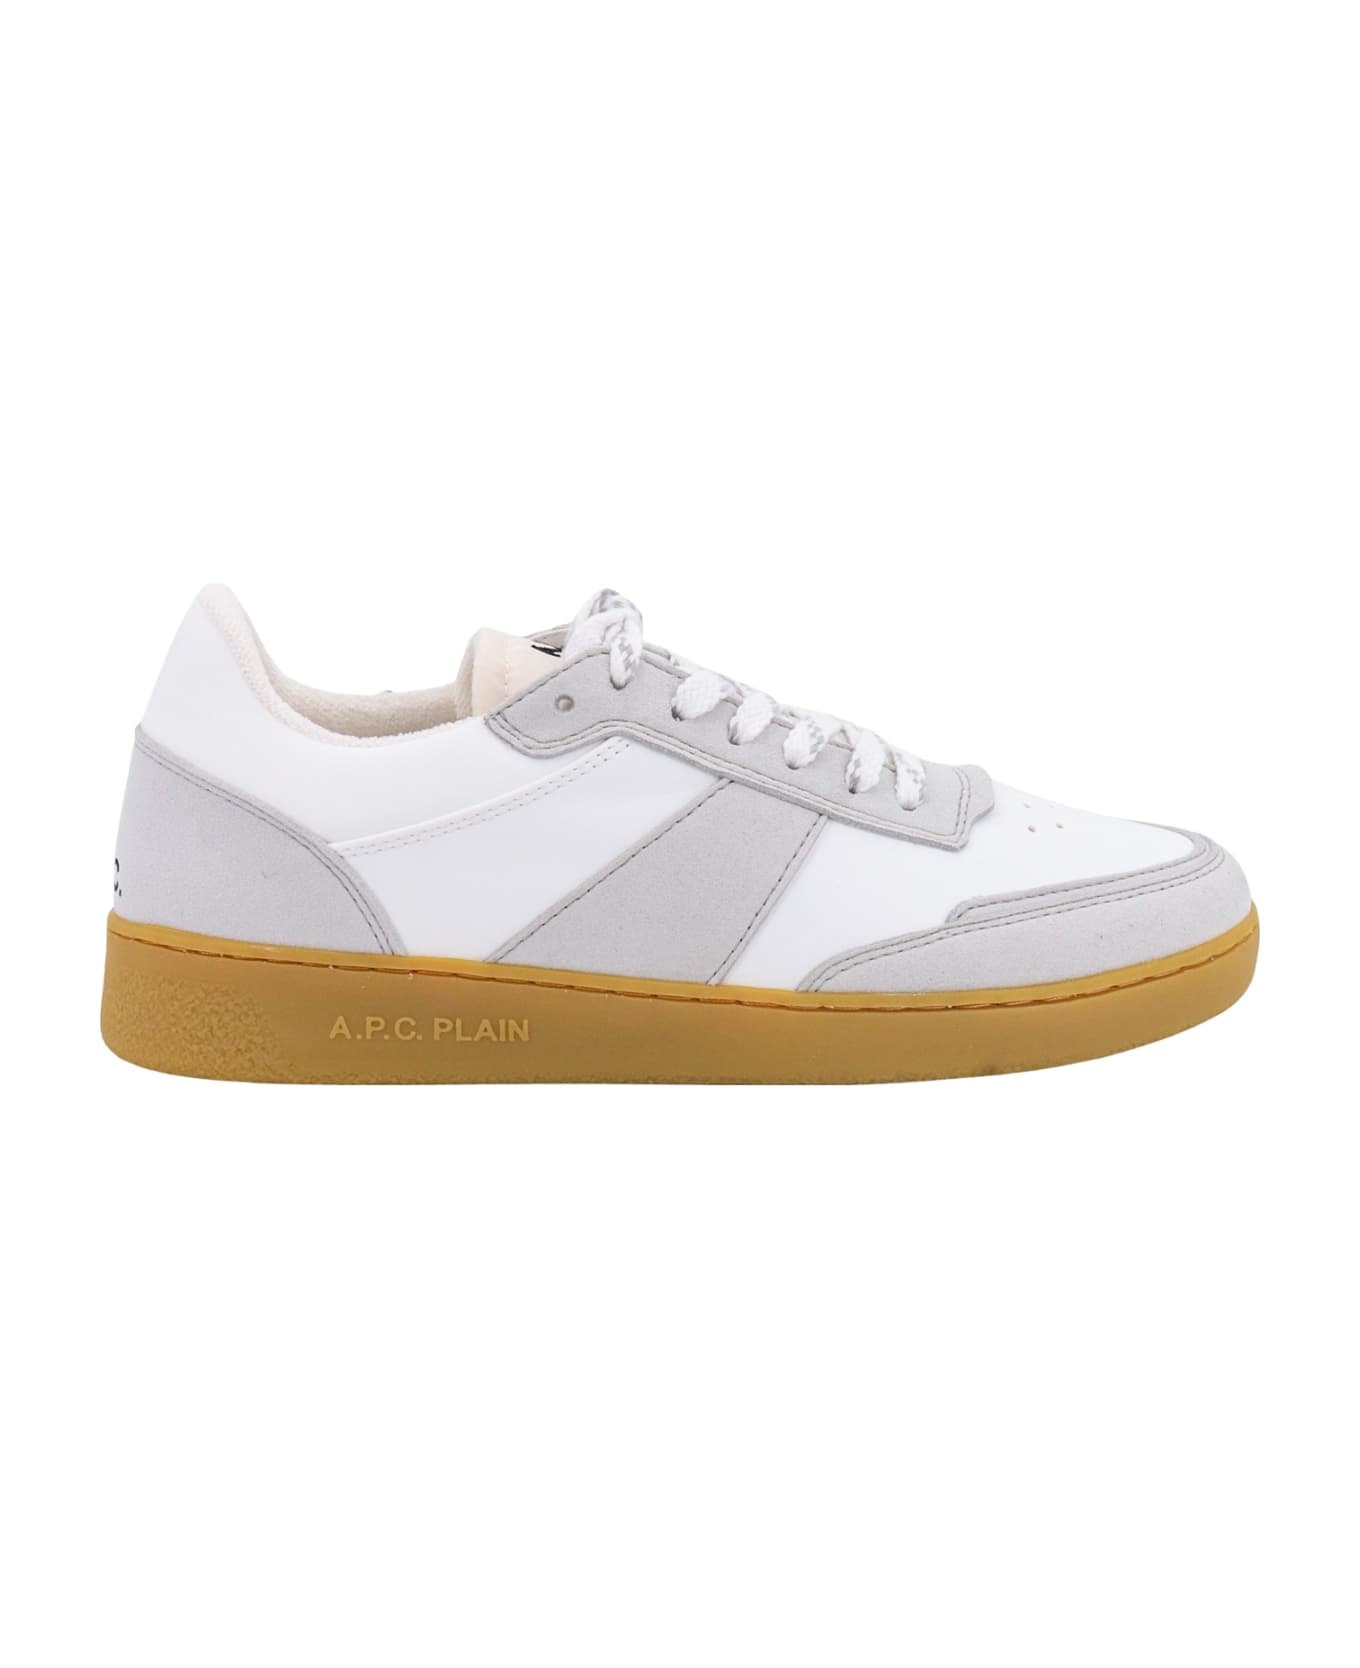 A.P.C. Sneakers - White スニーカー